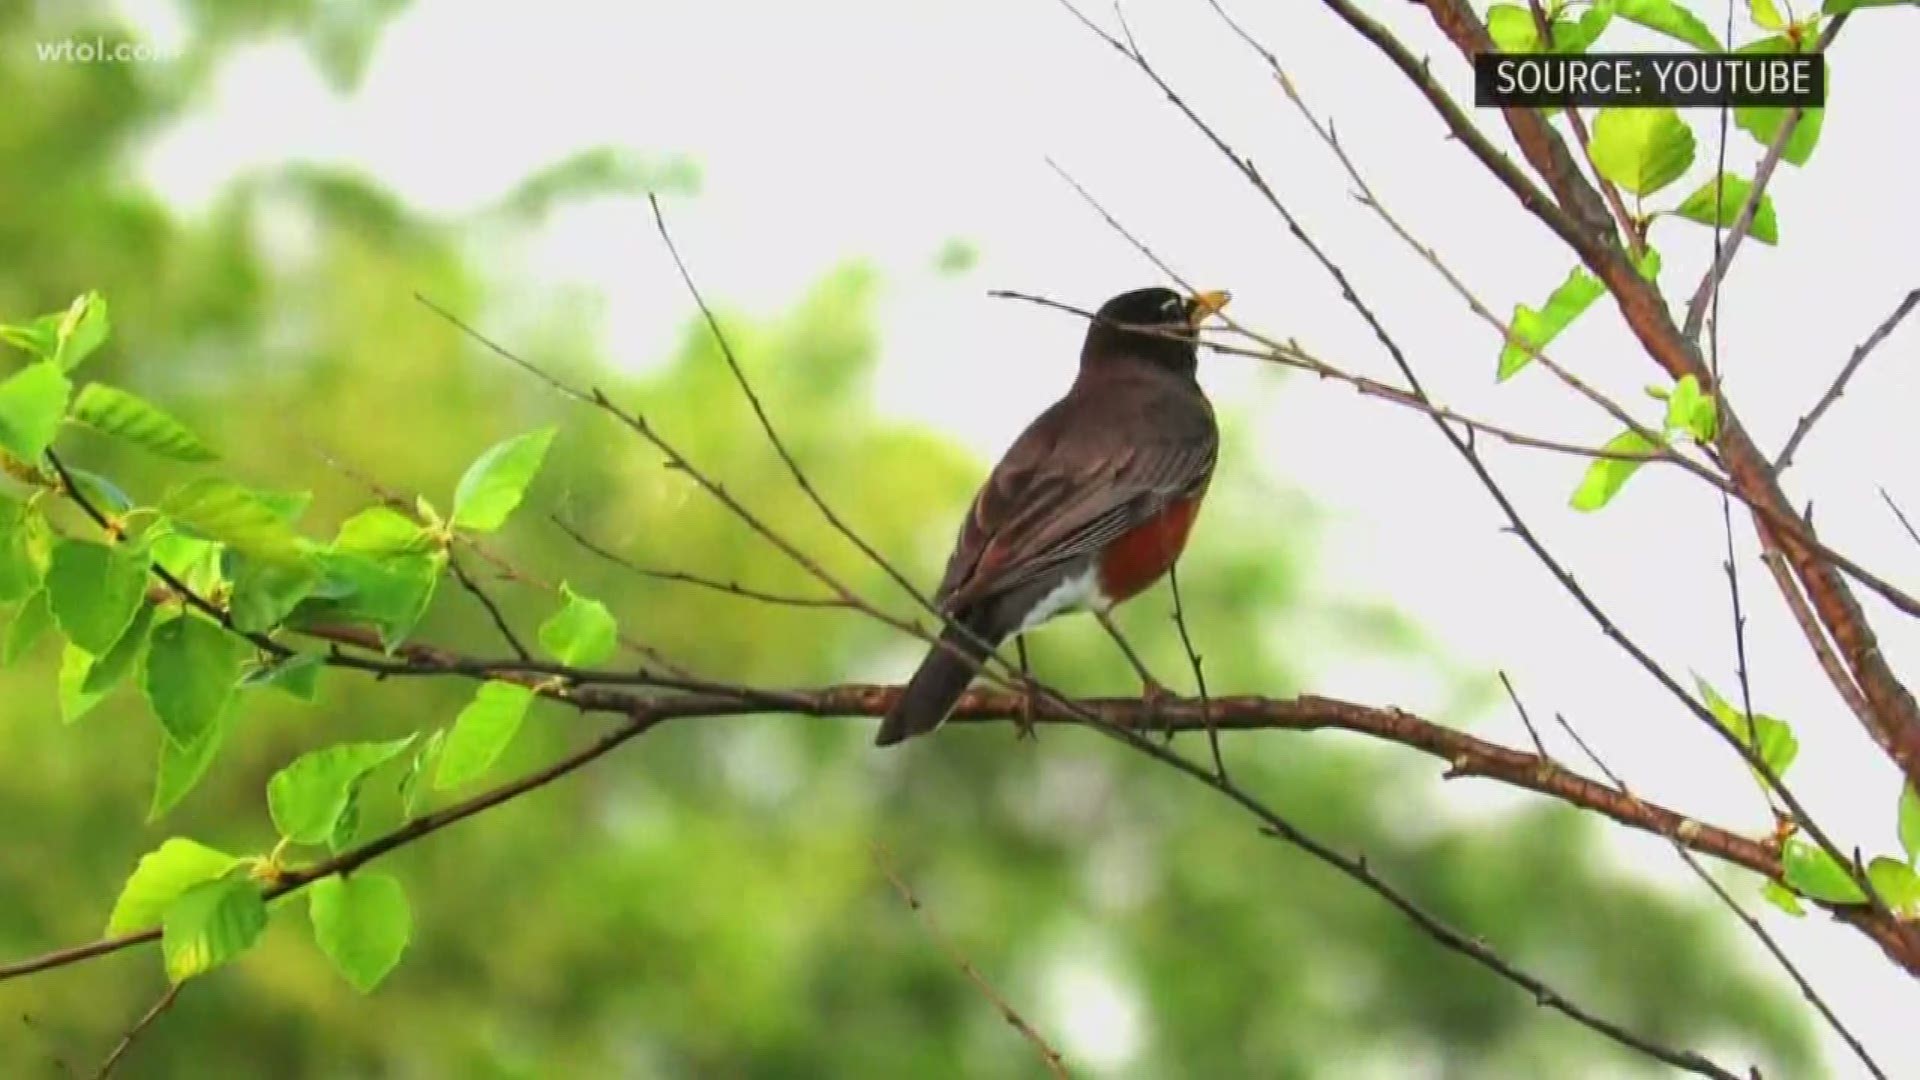 Many Ohioans are reporting hearing robins singing in the morning already